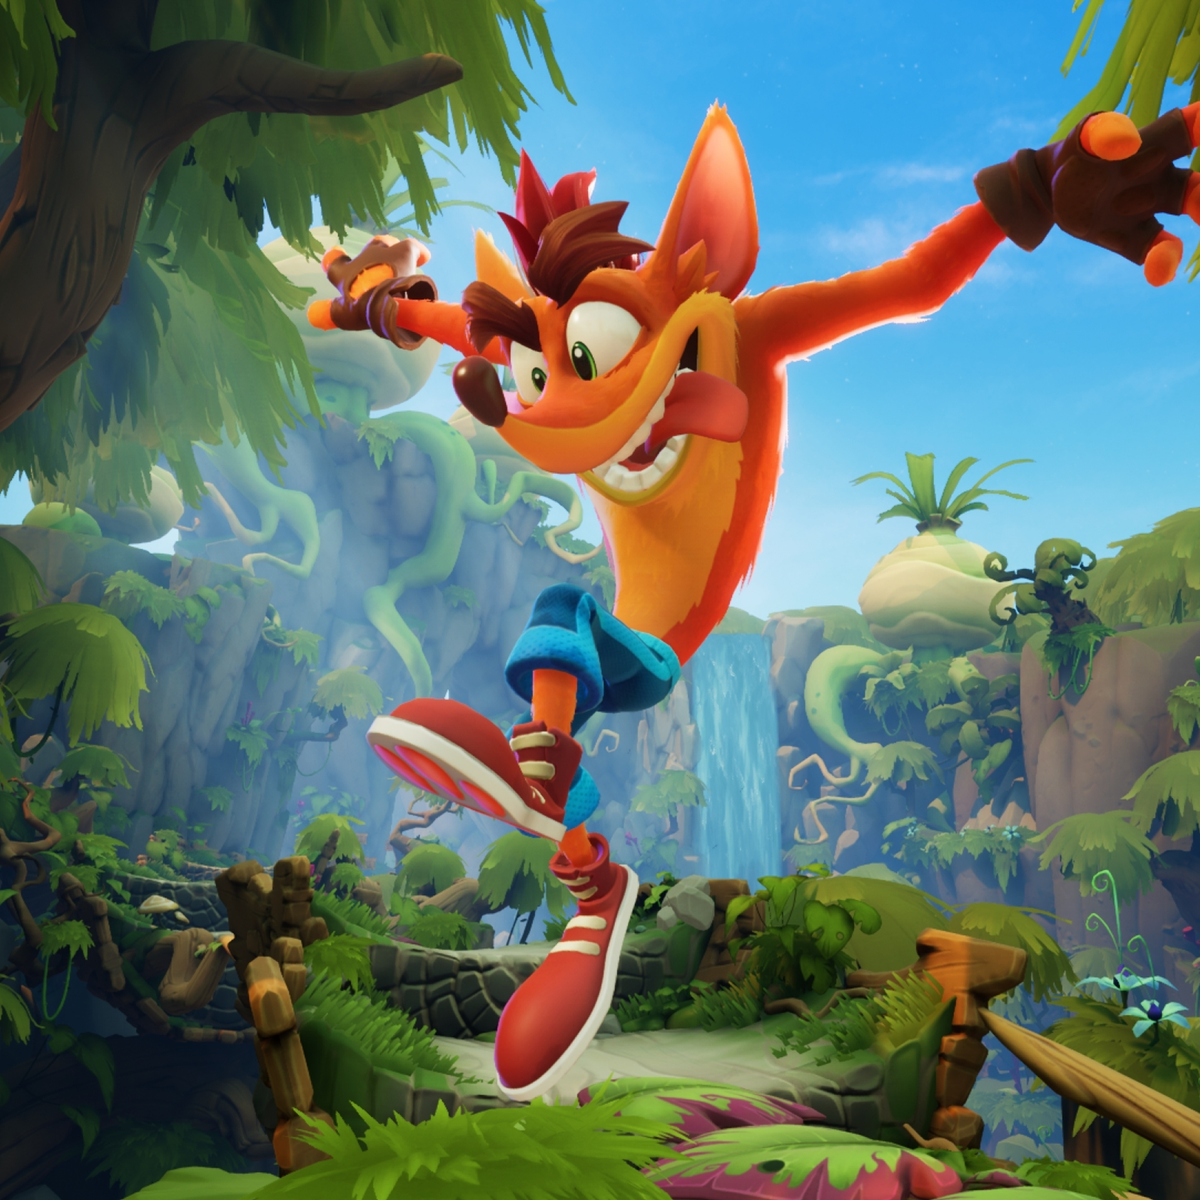 Crash Bandicoot 4: It's About Time officially announced with debut